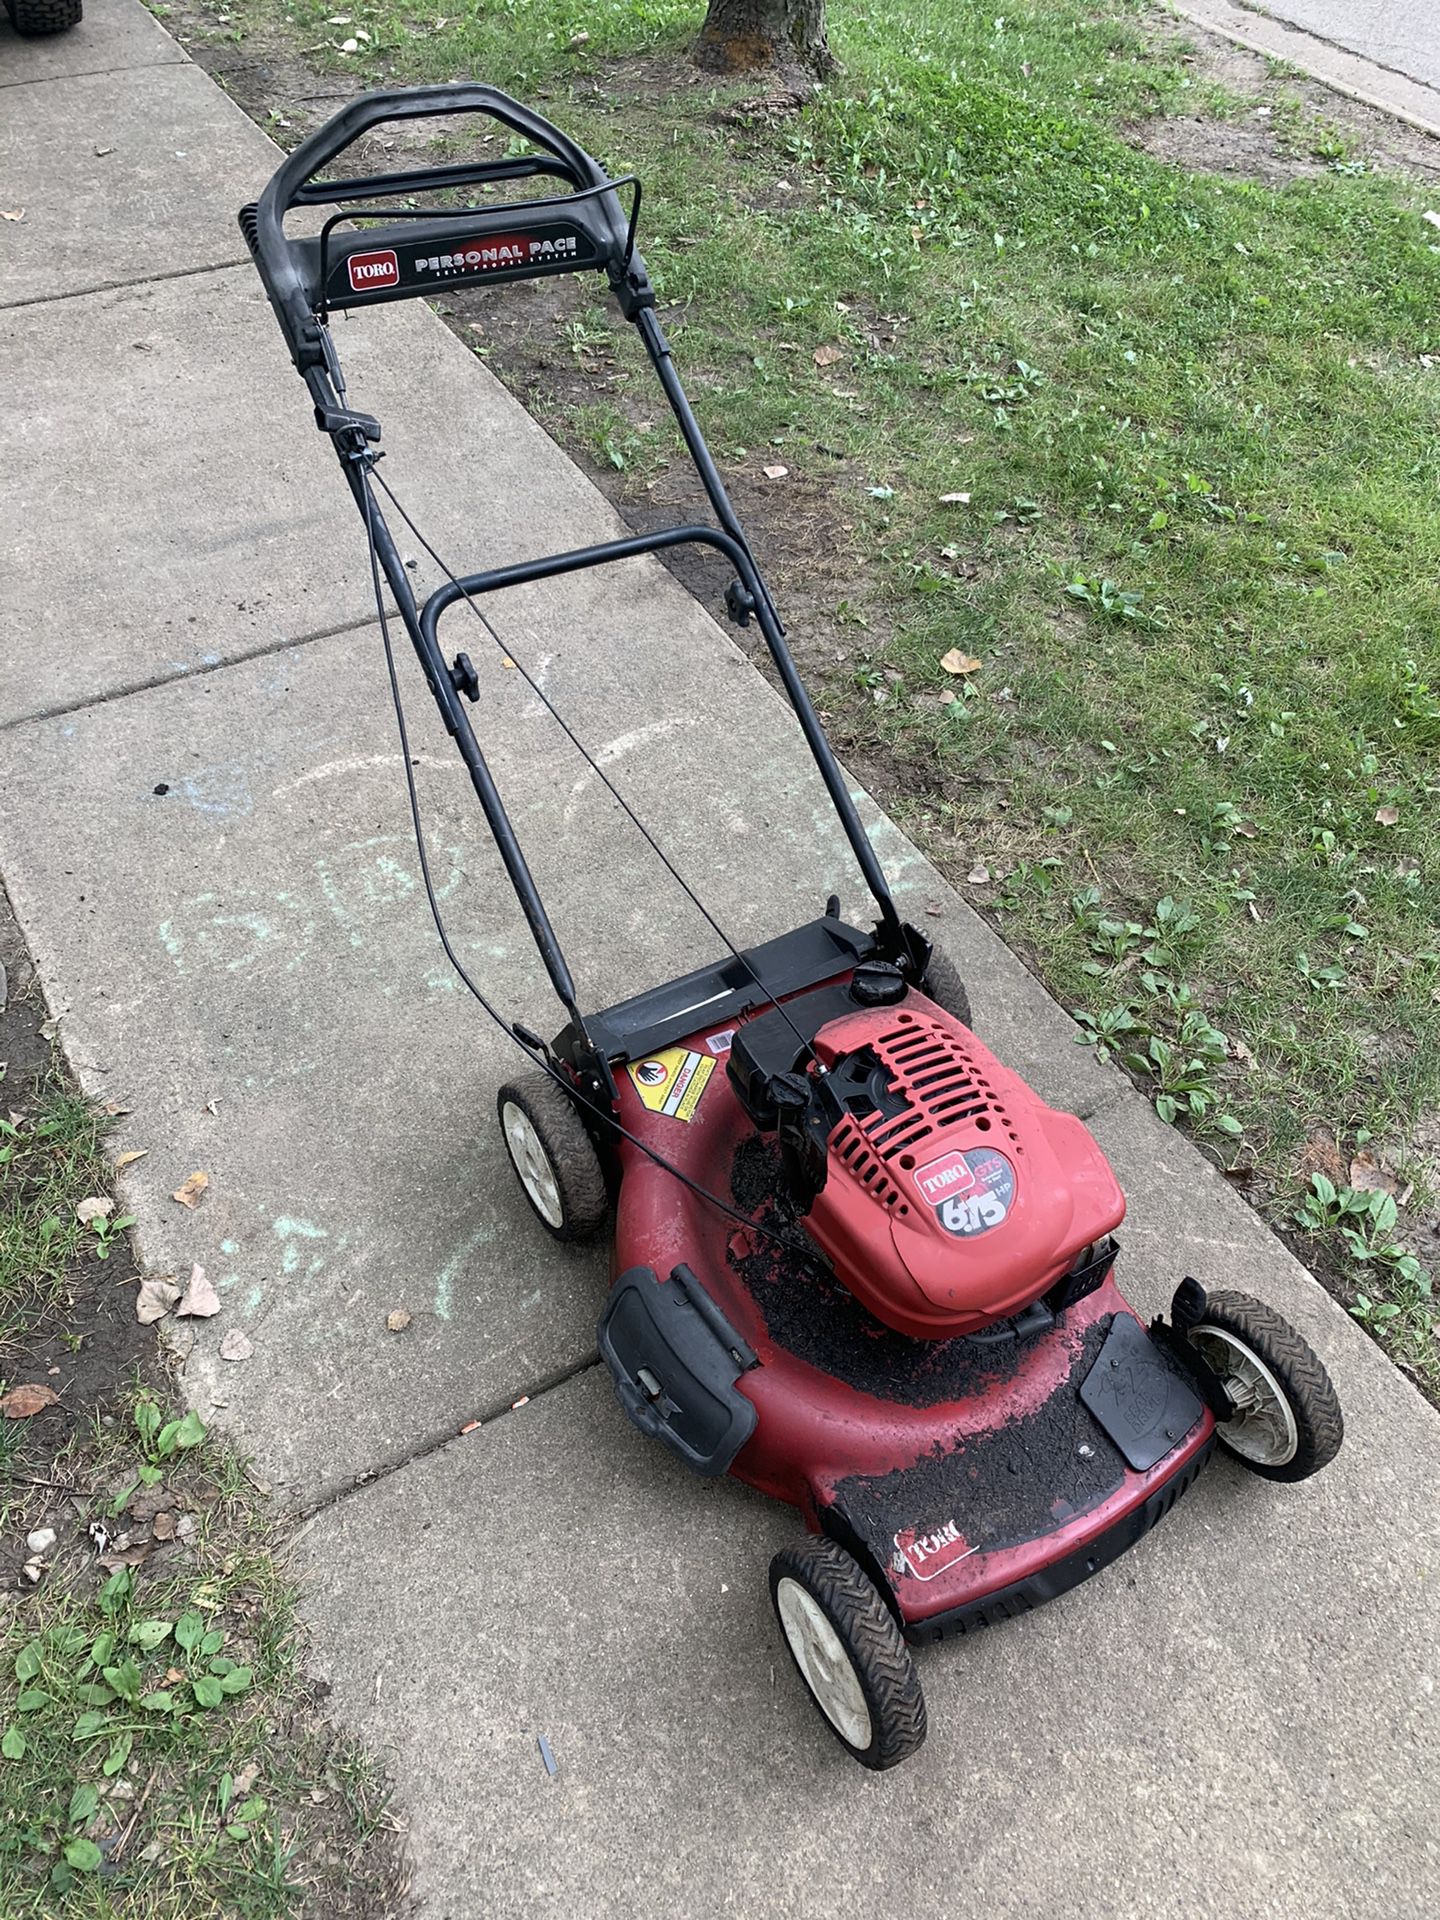 Toro recycler personal pace self propelled lawn mower FOR PARTS OR REPAIR. Engine starts on starting fluid, then dies. Personal pace handle also does